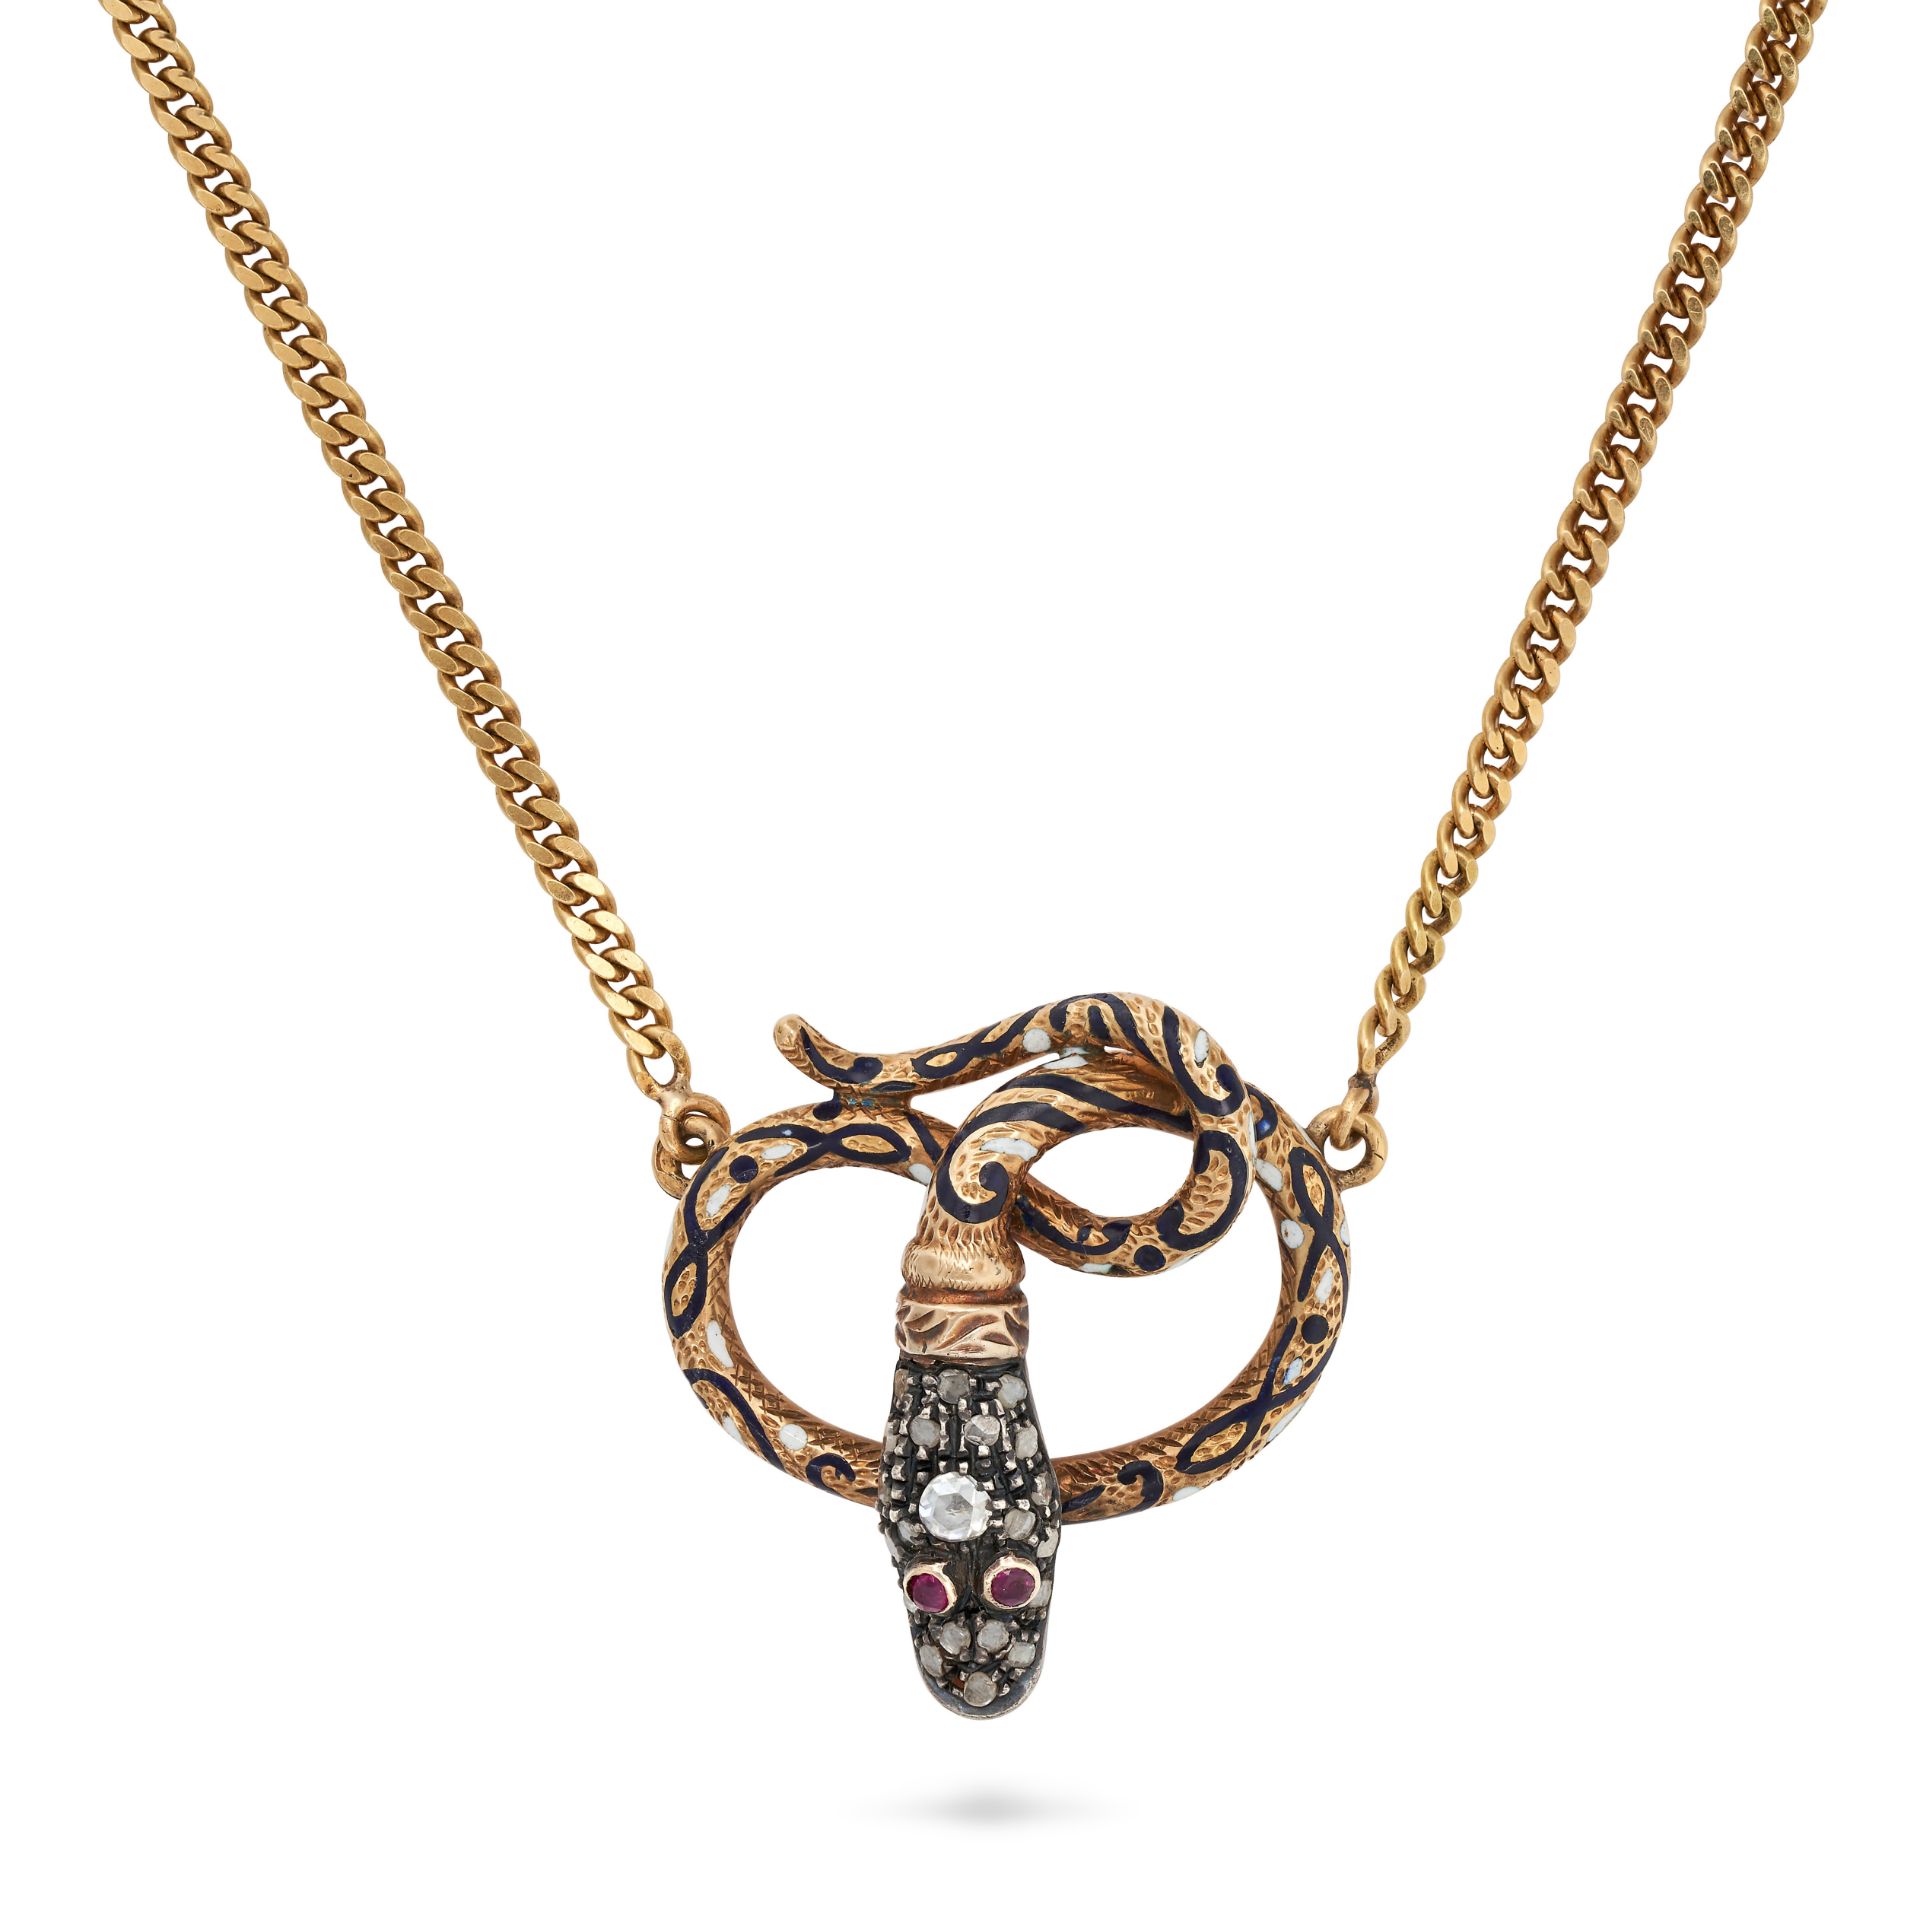 A DIAMOND, RUBY AN ENAMEL SNAKE NECKLACE in yellow gold and silver, the pendant designed as a coi...